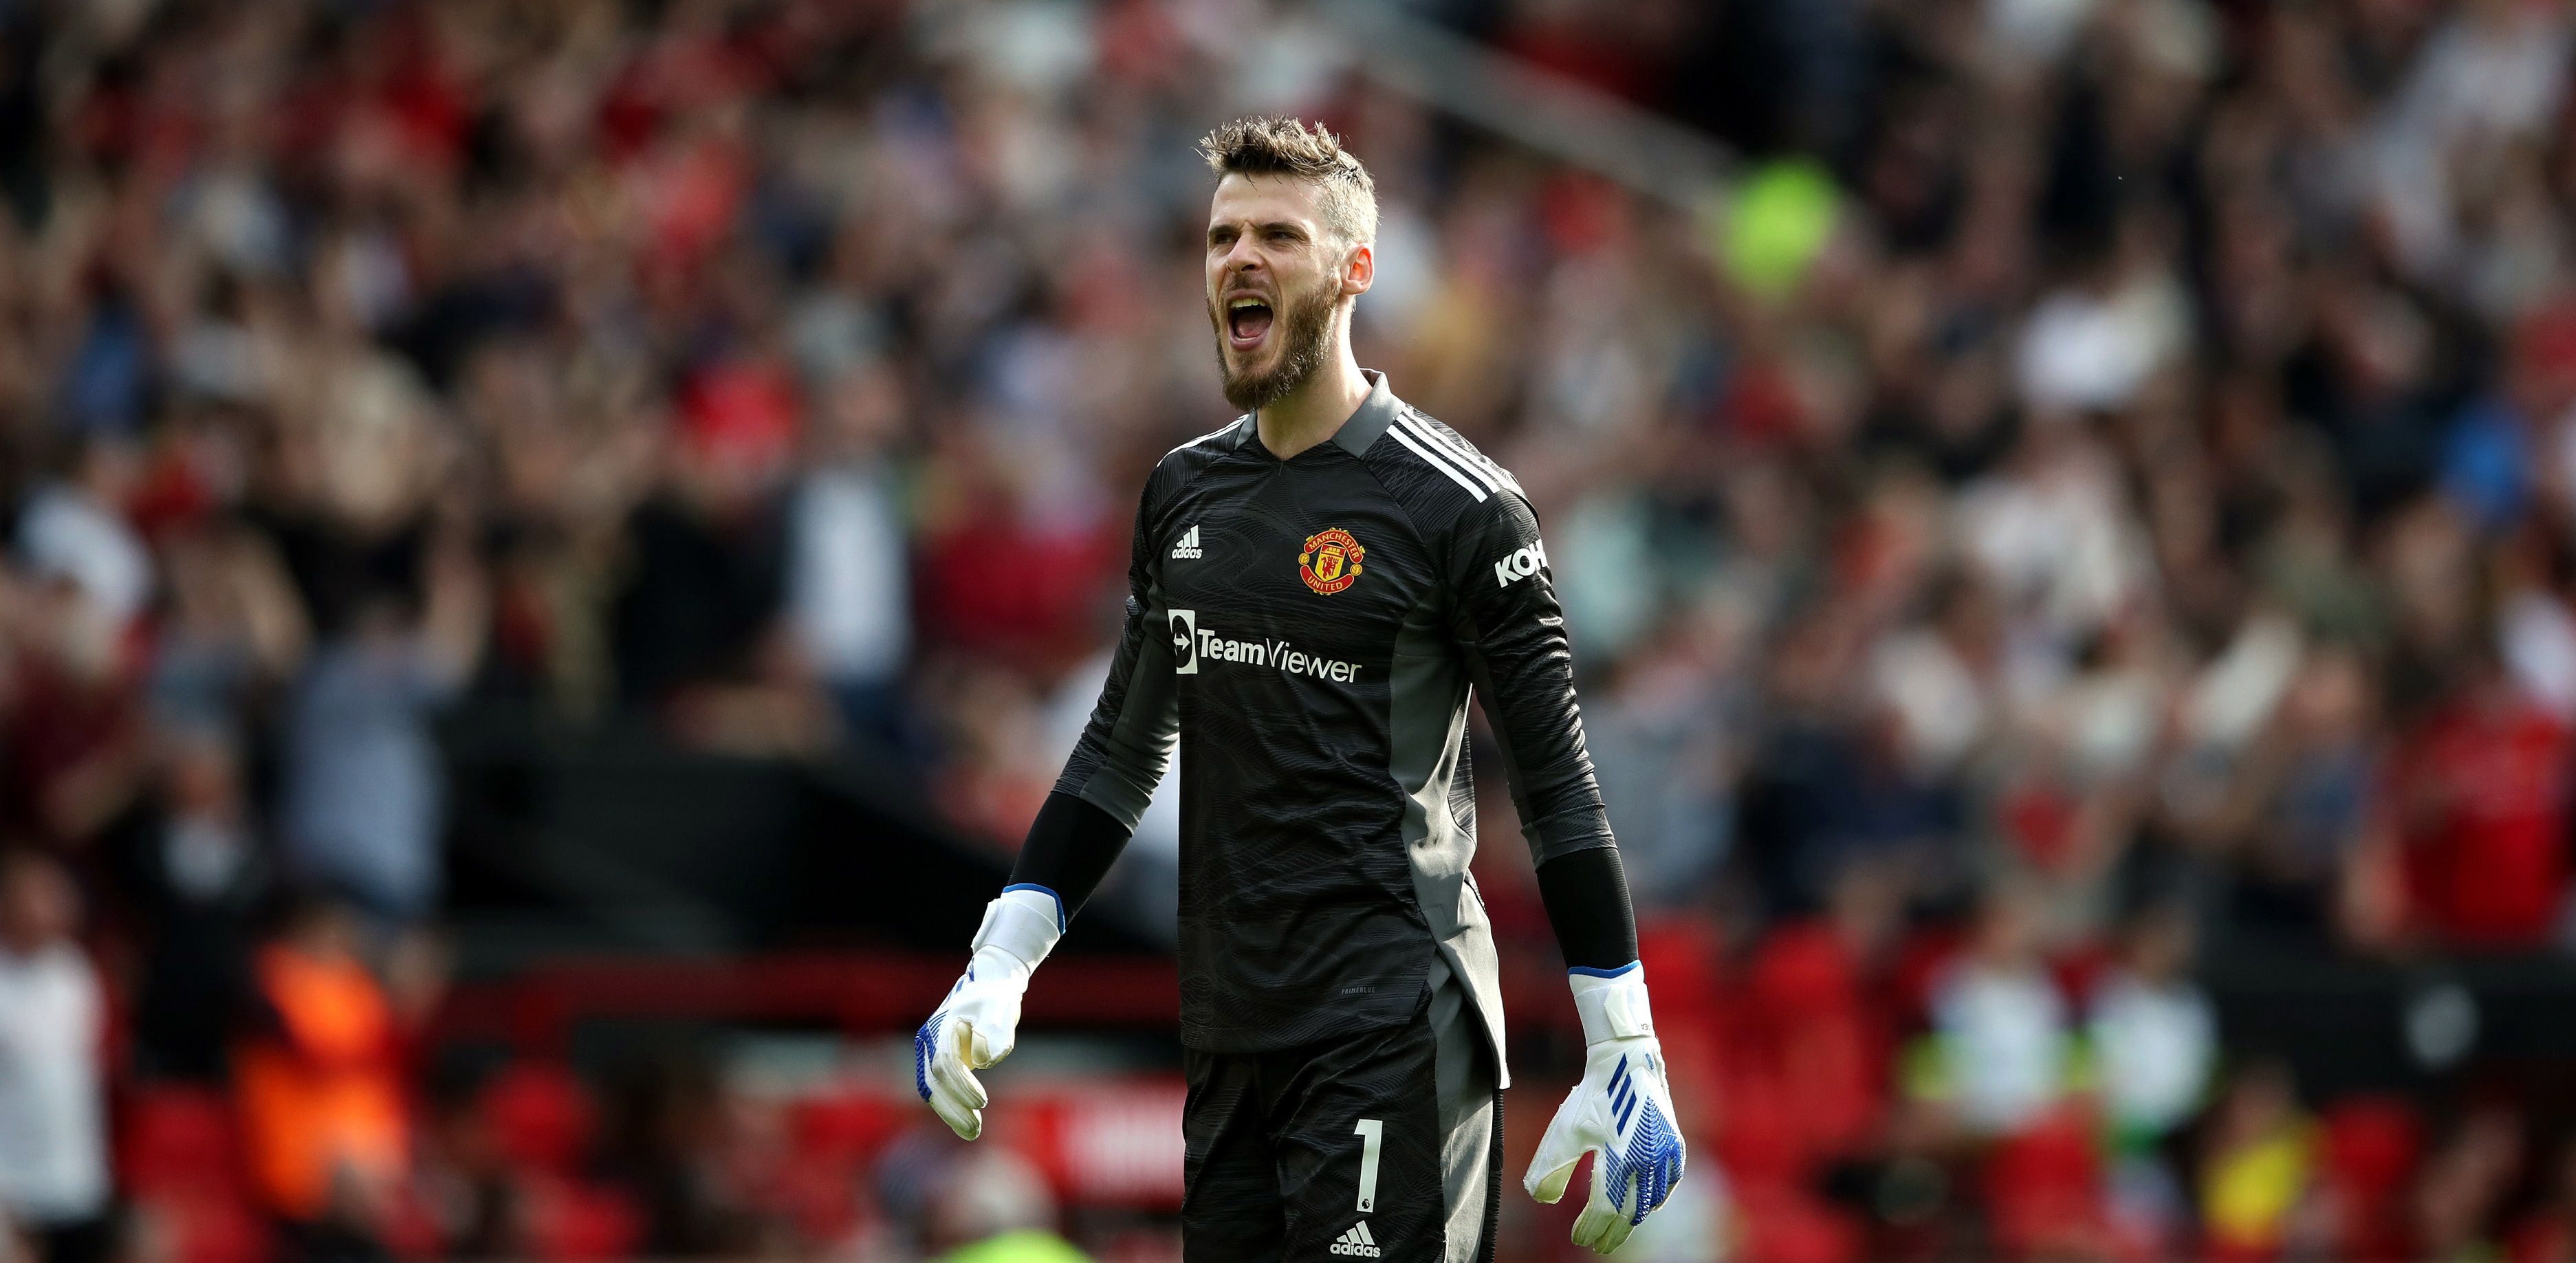 De Gea boldly thinking about Anfield win ahead of Man Utd’s trip to Liverpool in the PL